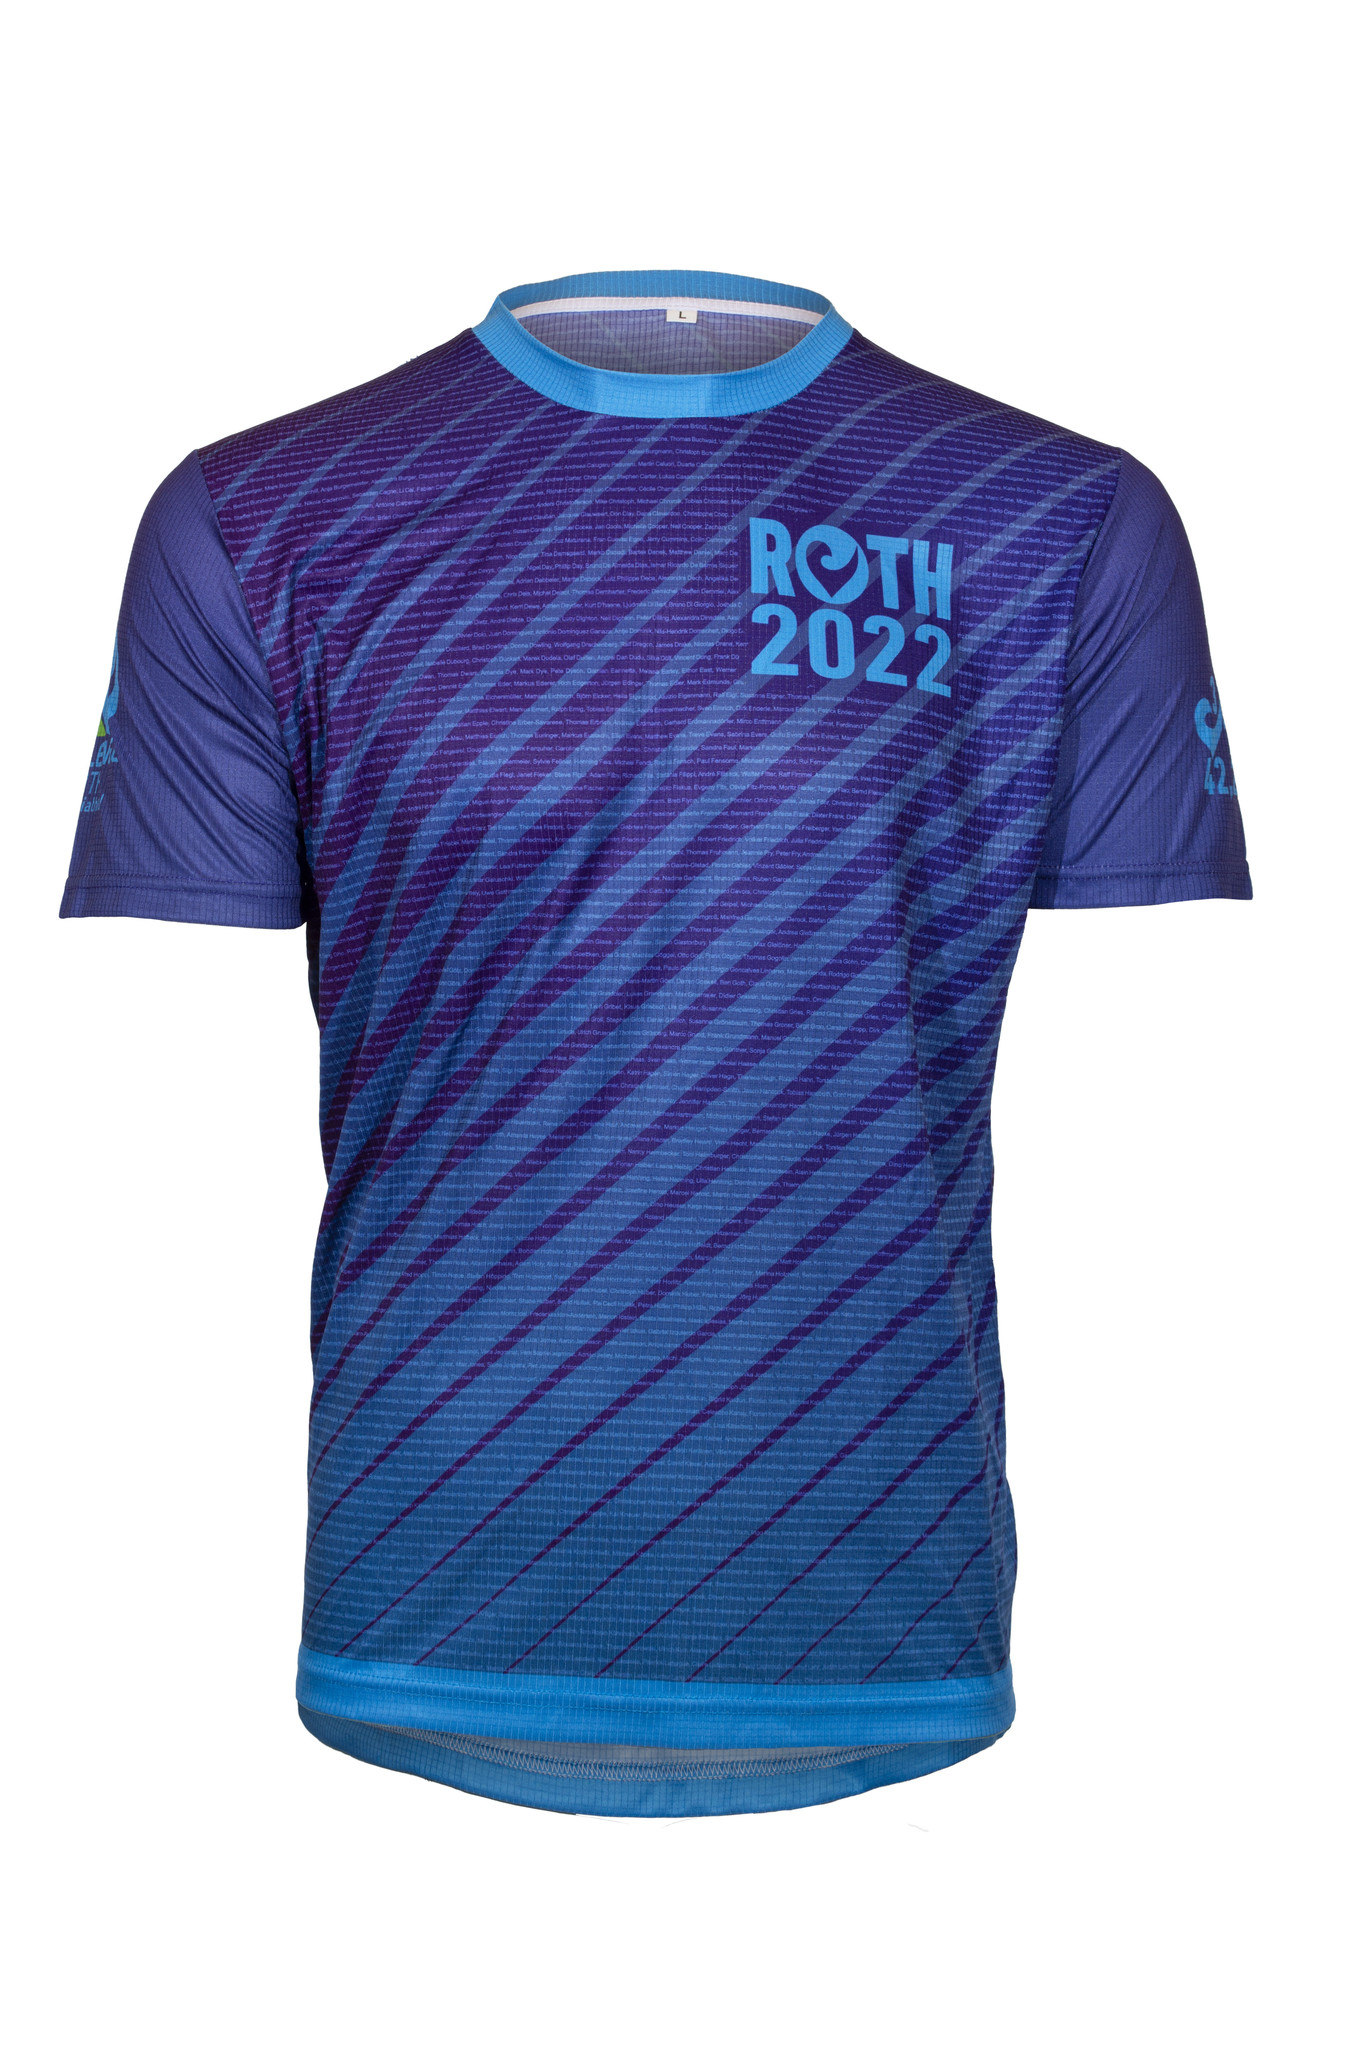 The official Challenge Roth Nameshirt 2022